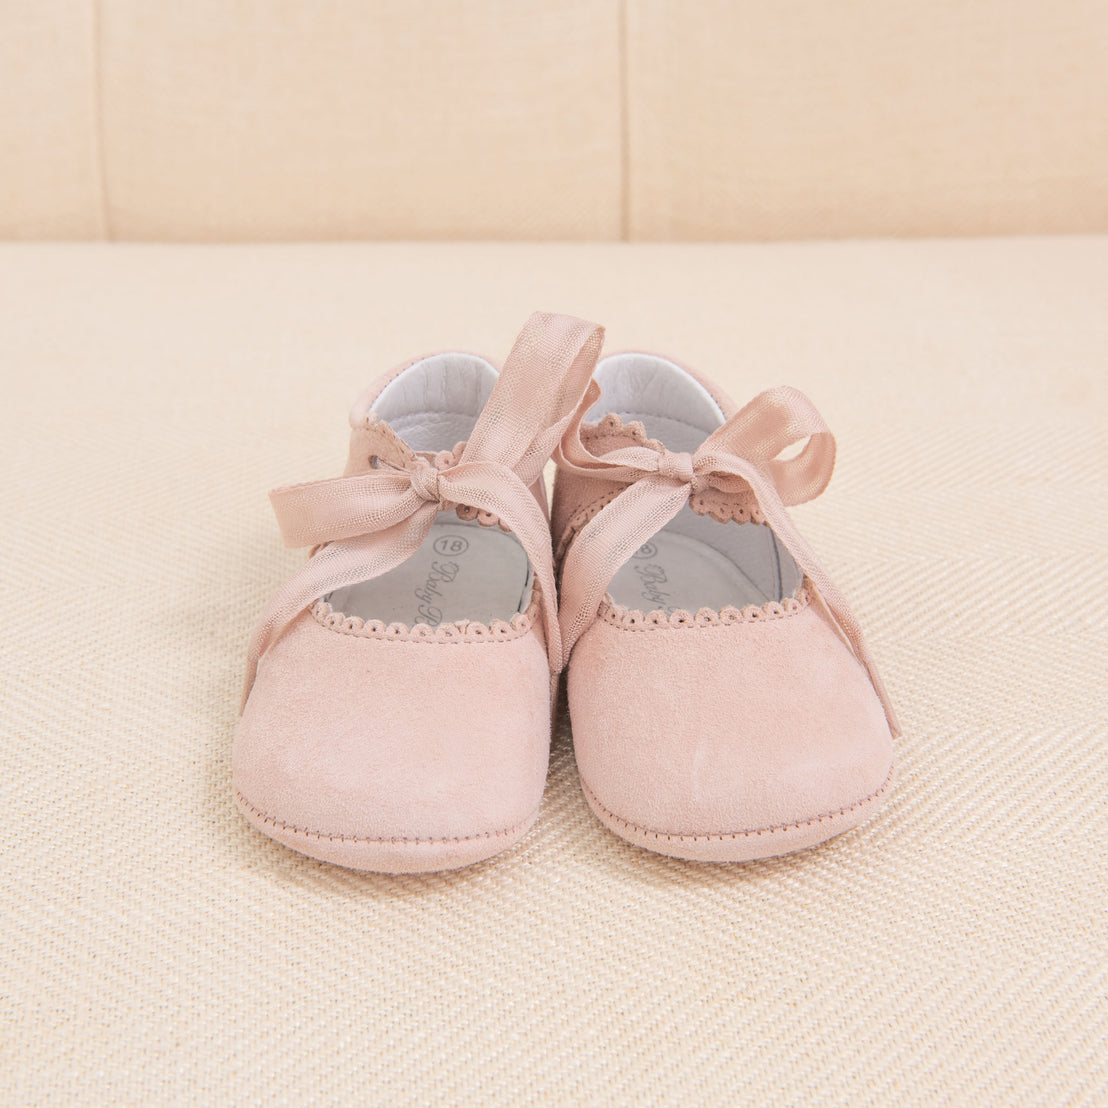 A pair of small pink Girls Suede Tie Mary Janes with ribbon ties, placed on a beige textured fabric background.